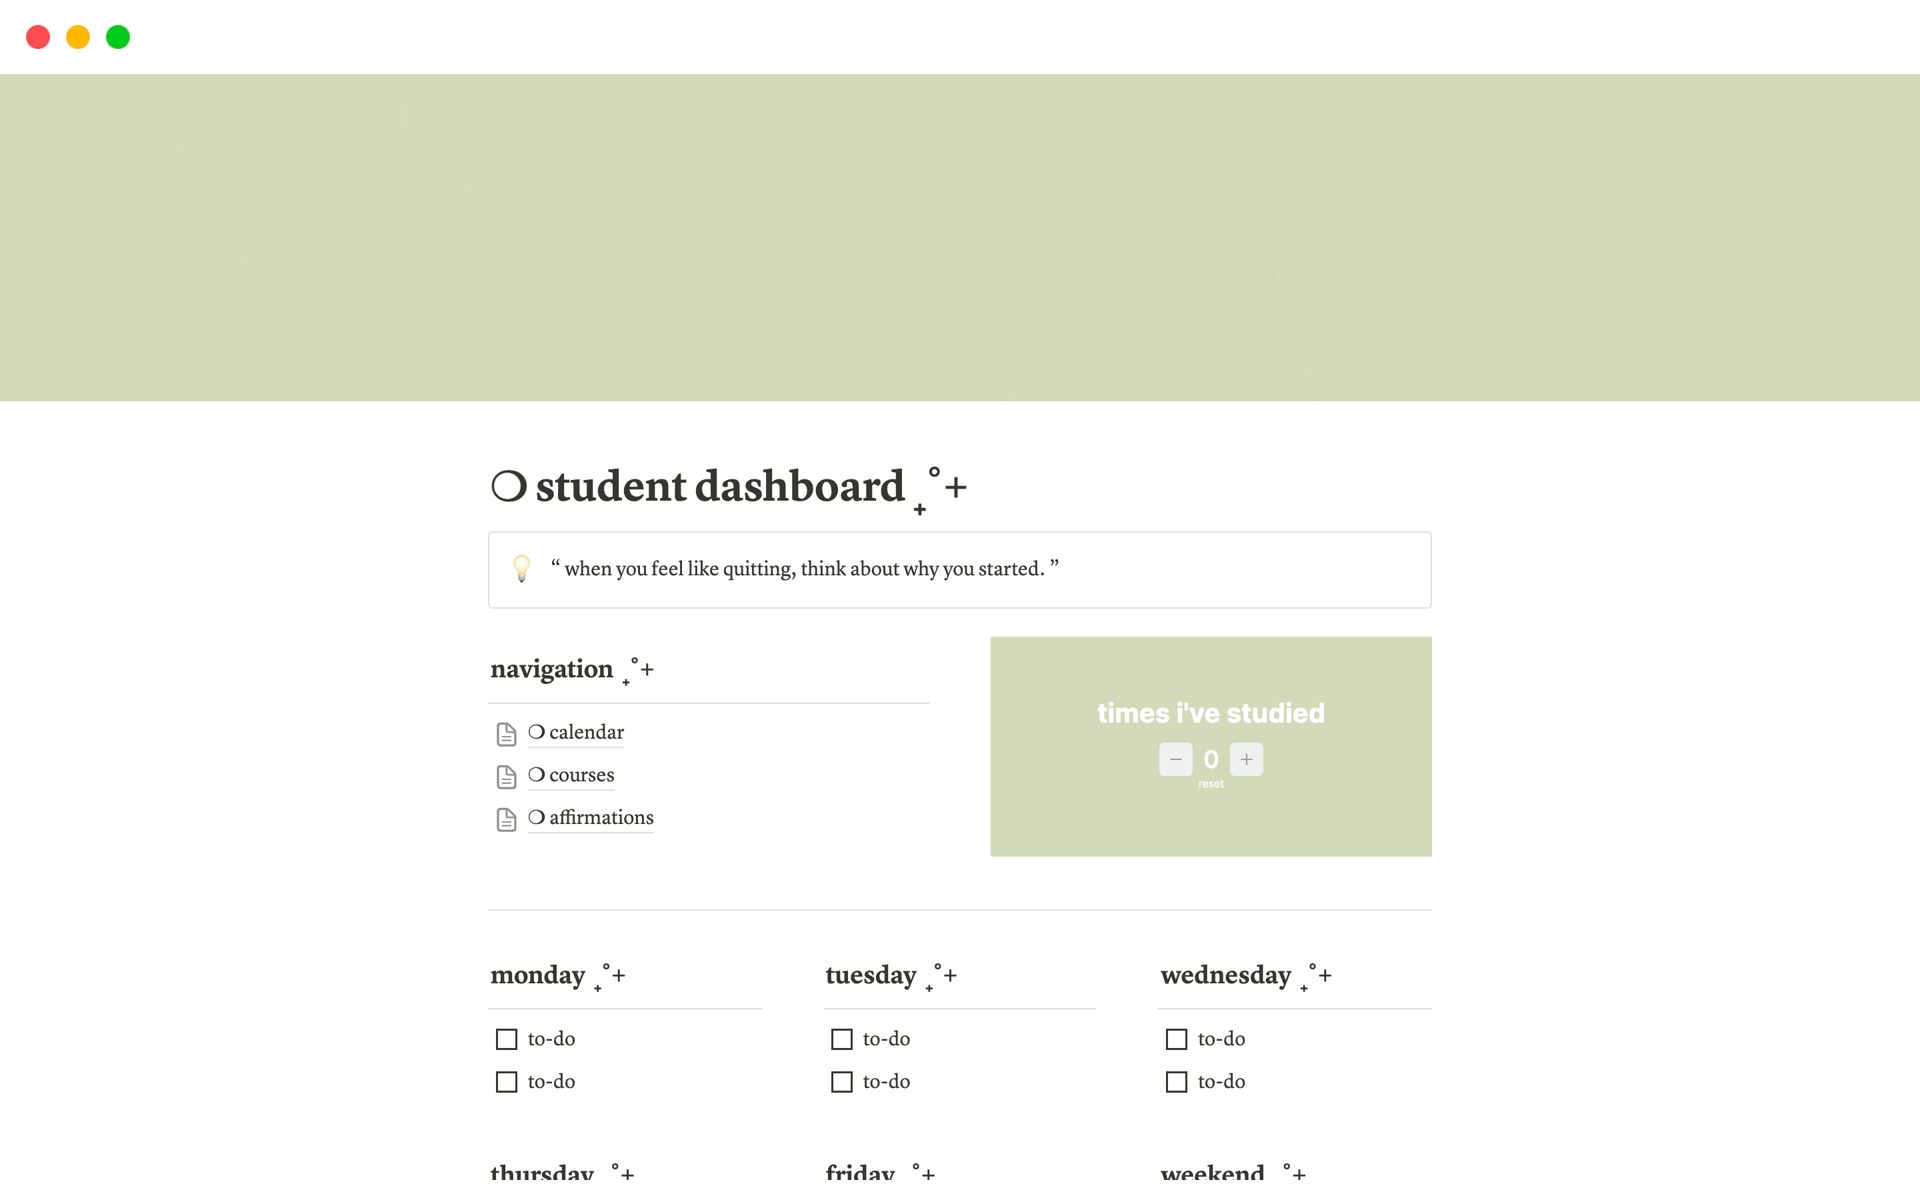 my student dashboard template is an aesthetically pleasing organisational tool designed to help students manage their academic tasks, deadlines, and personal goals efficiently,  all while enjoying a visually appealing and user-friendly interface.